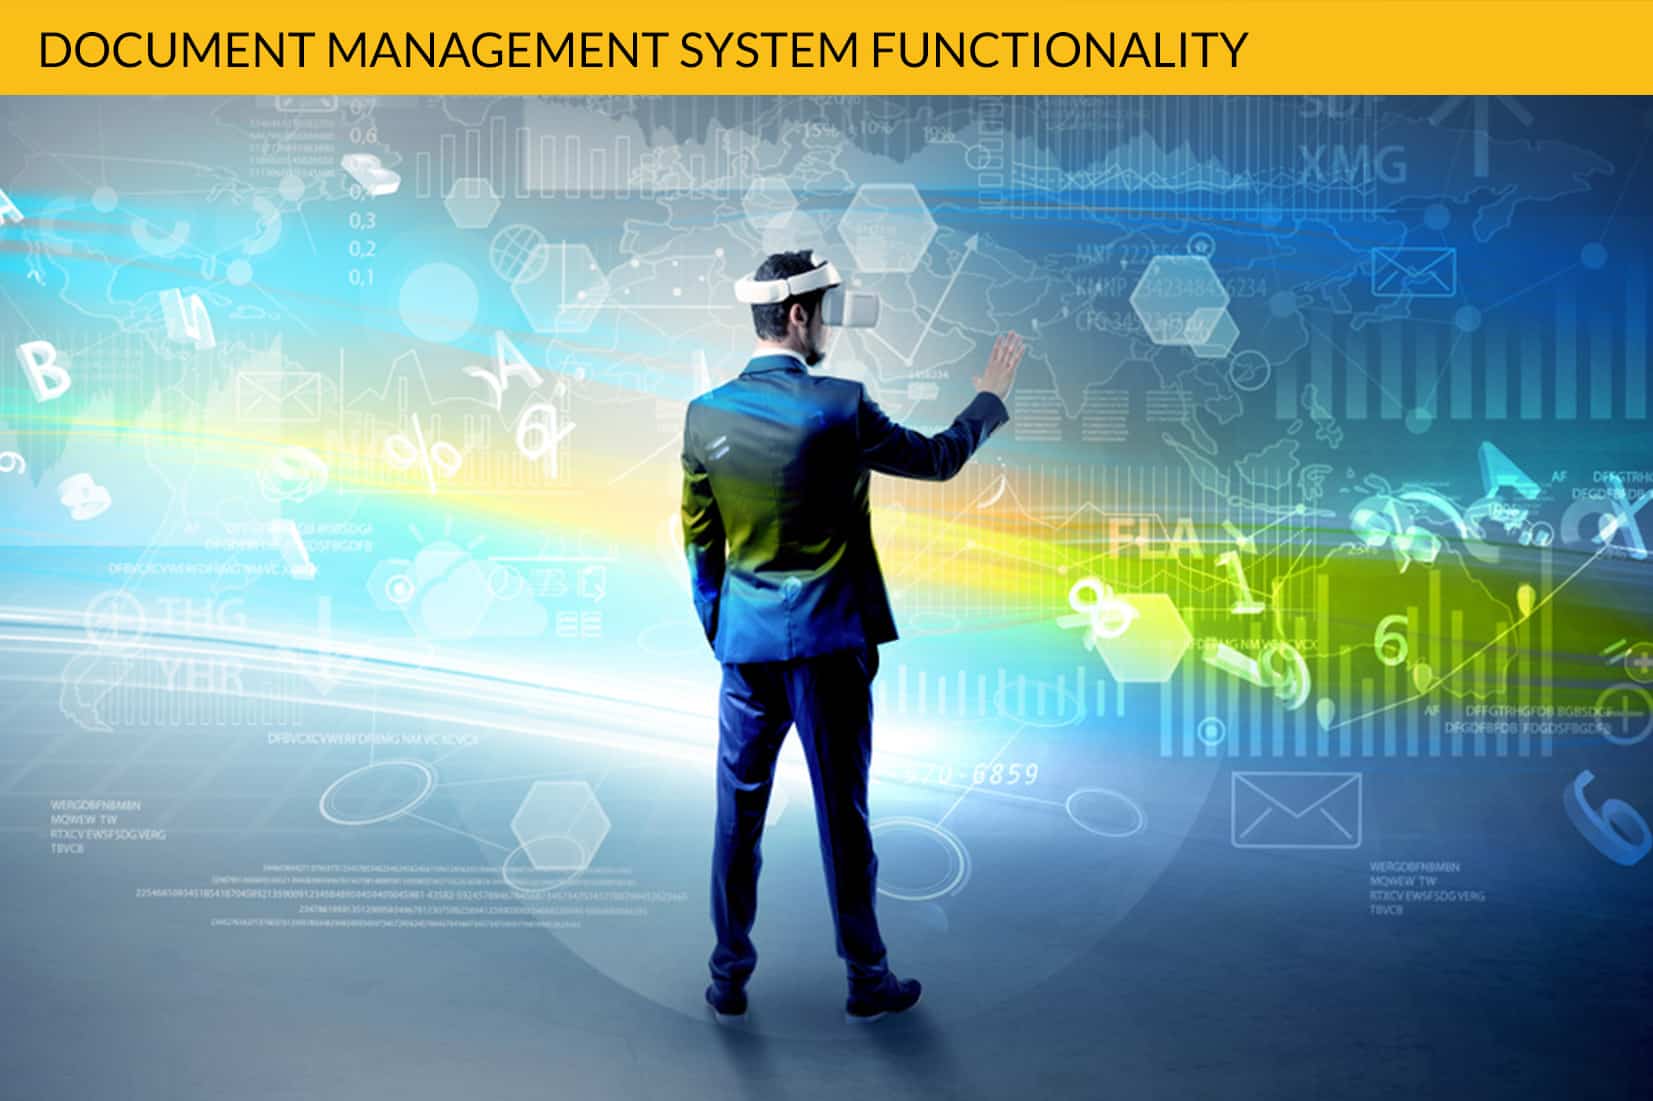 Document management system functionality